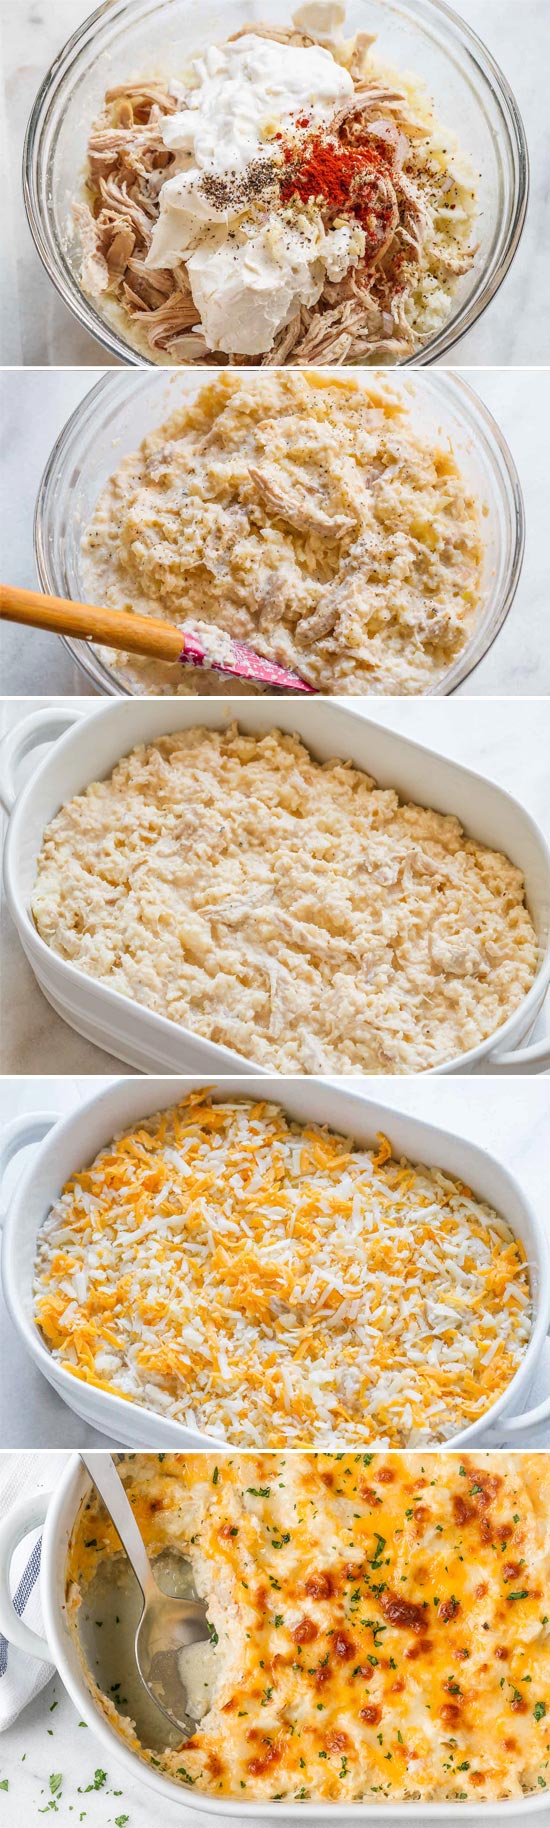 Creamy Chicken and Cauliflower Rice Casserole - #eatwell101 #recipe A quick, easy, and over the top tasty #Chicken and #Cauliflower  #Casserole #dinner - #glutenfree, #keto, #lowcarb friendly